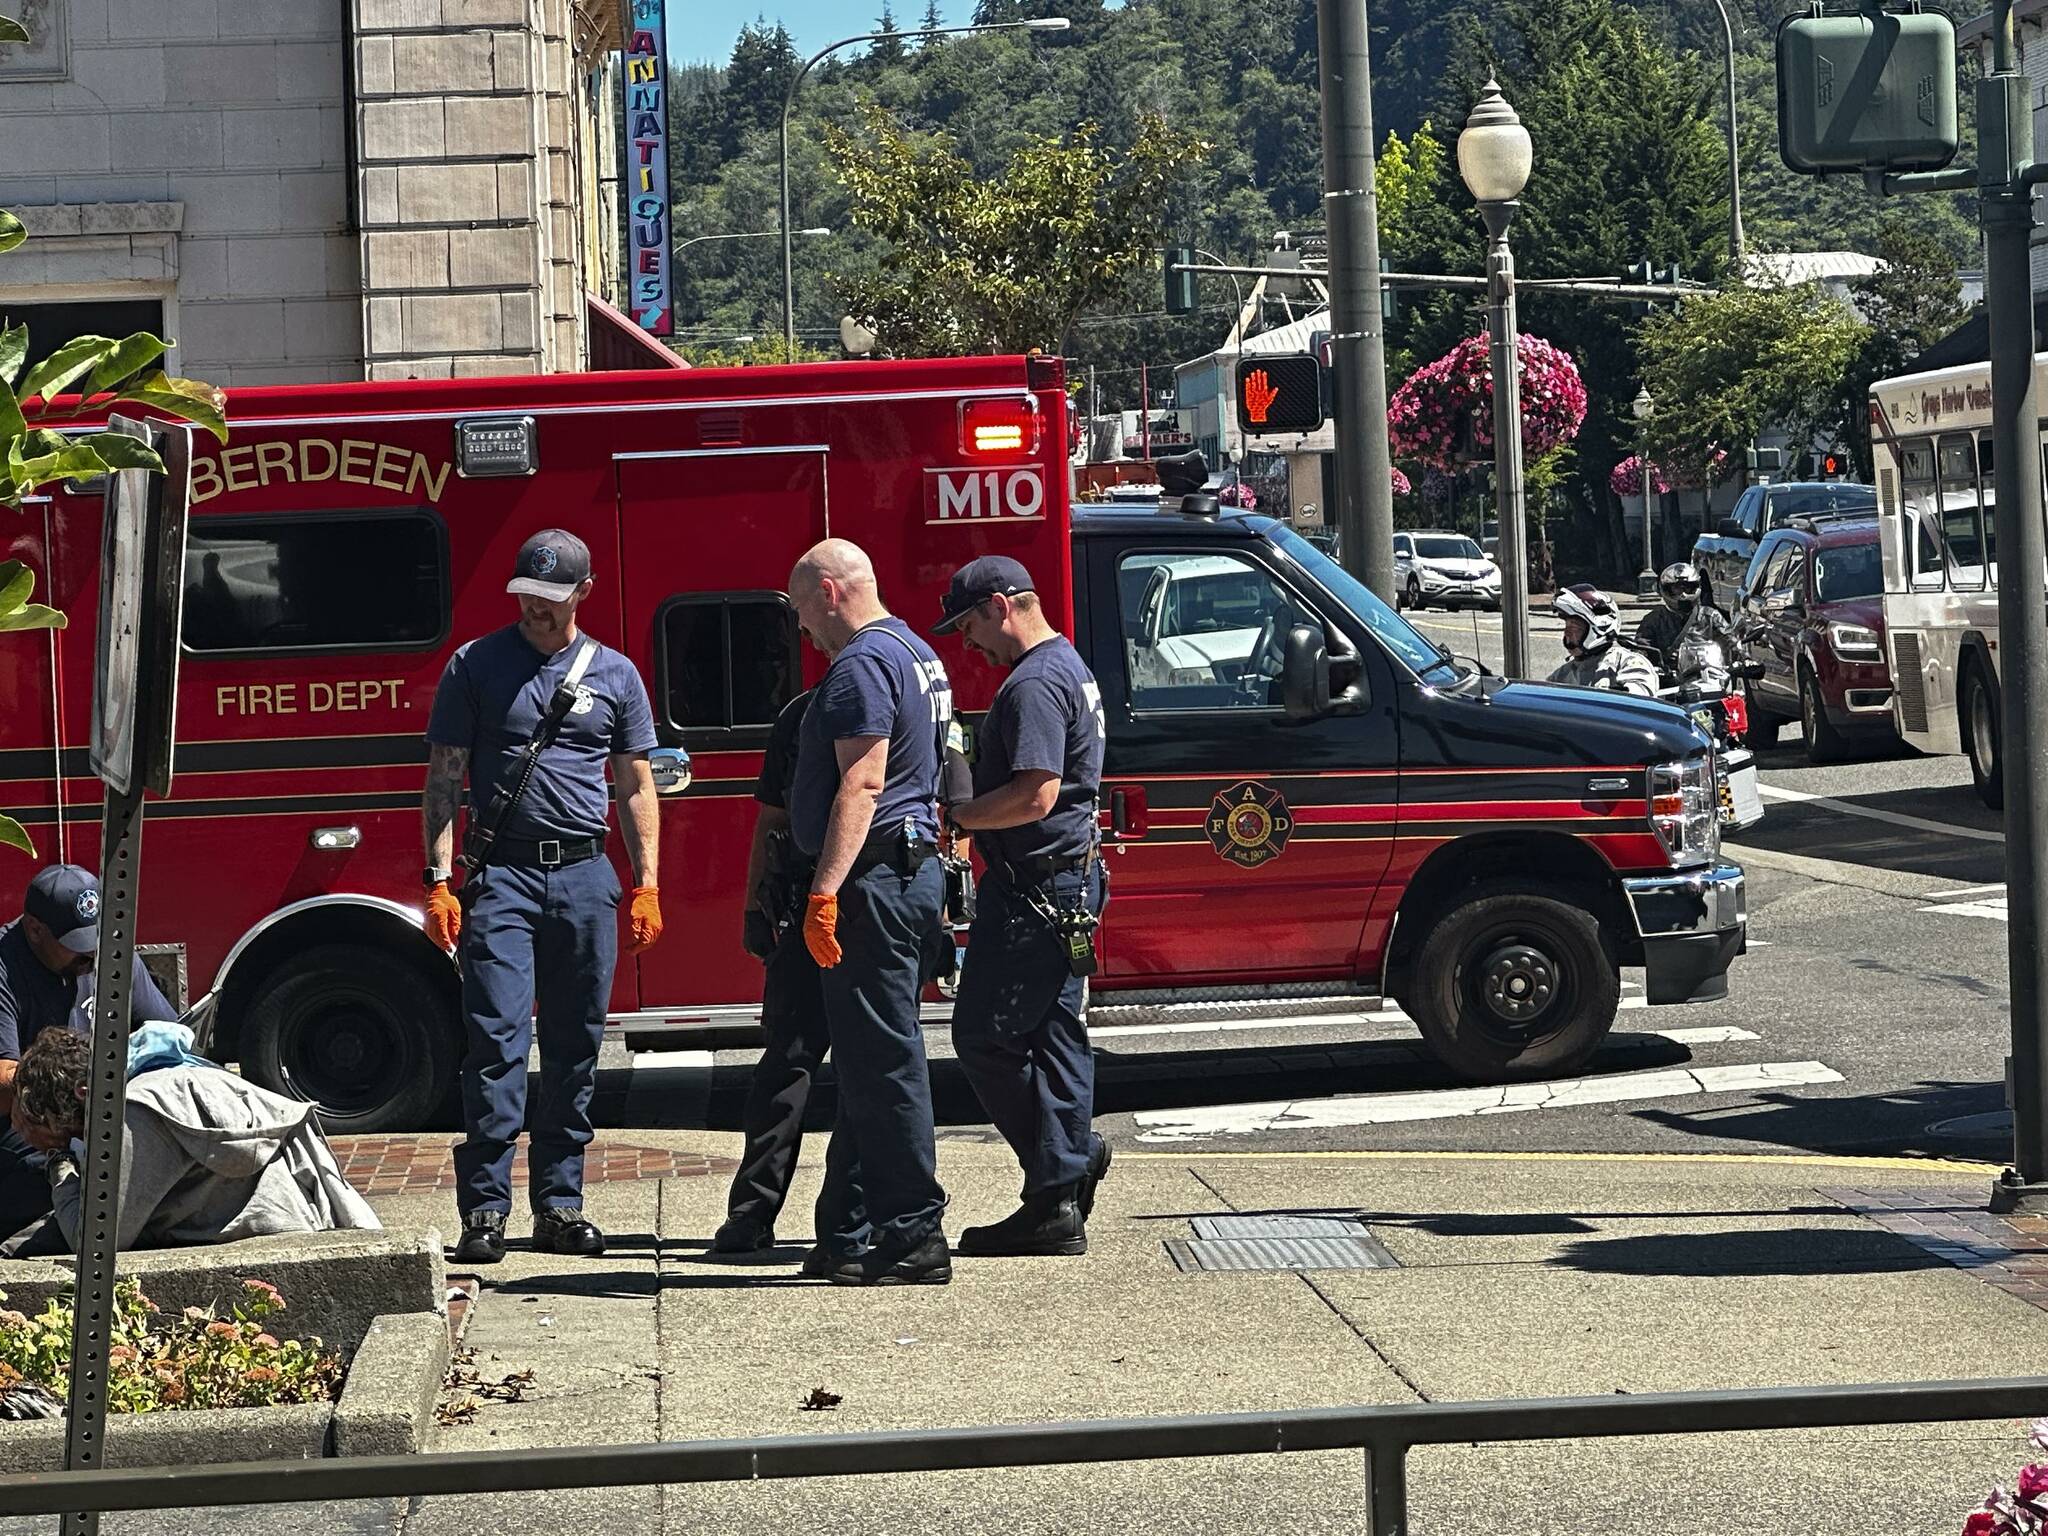 Andy Bickar
Aberdeen Fire Department, which was dispatched for a reported drug overdose at the corner of South I and East Wishkah streets, was at the scene in less than two minutes. Cedar Martin, Rediviva’s sous chef, leapt into action to give CPR to the victim.